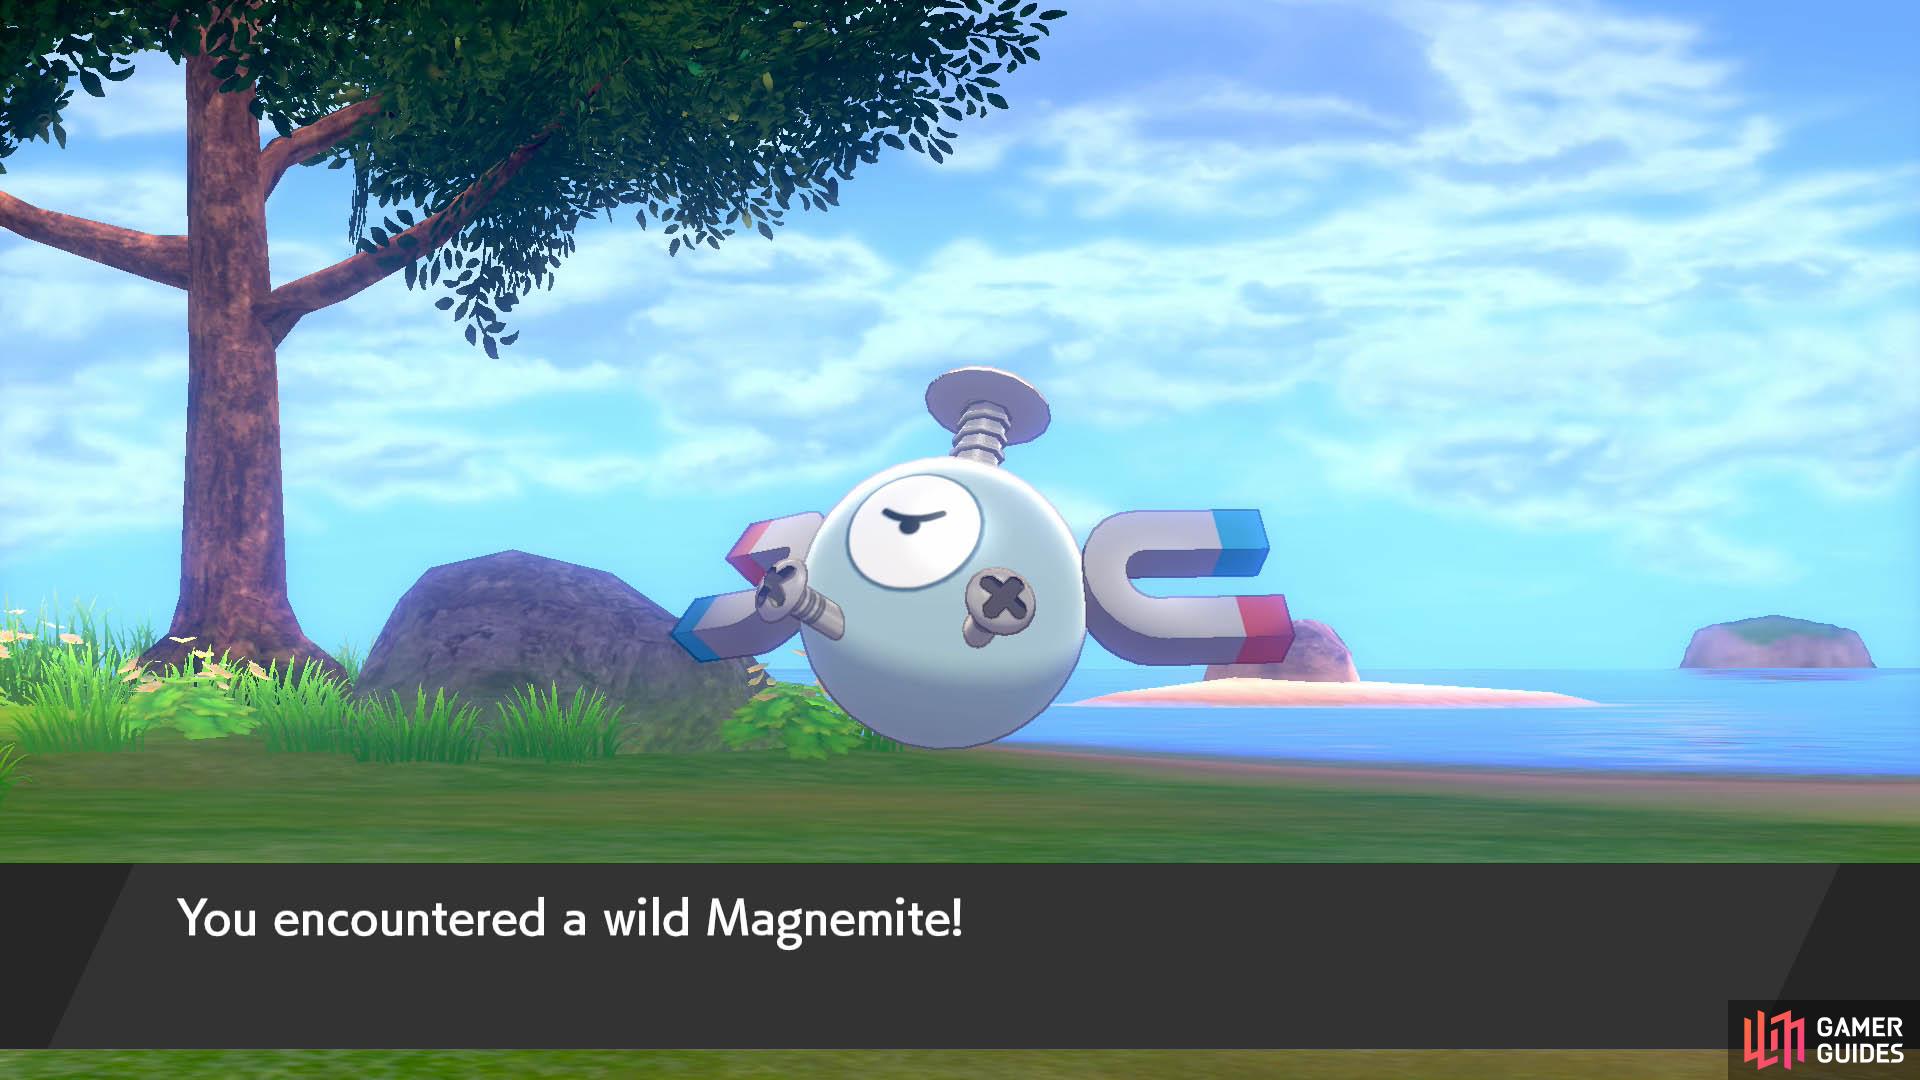 When there's a thunderstorm, you can find Magnemite's evolved forms wandering around as well.